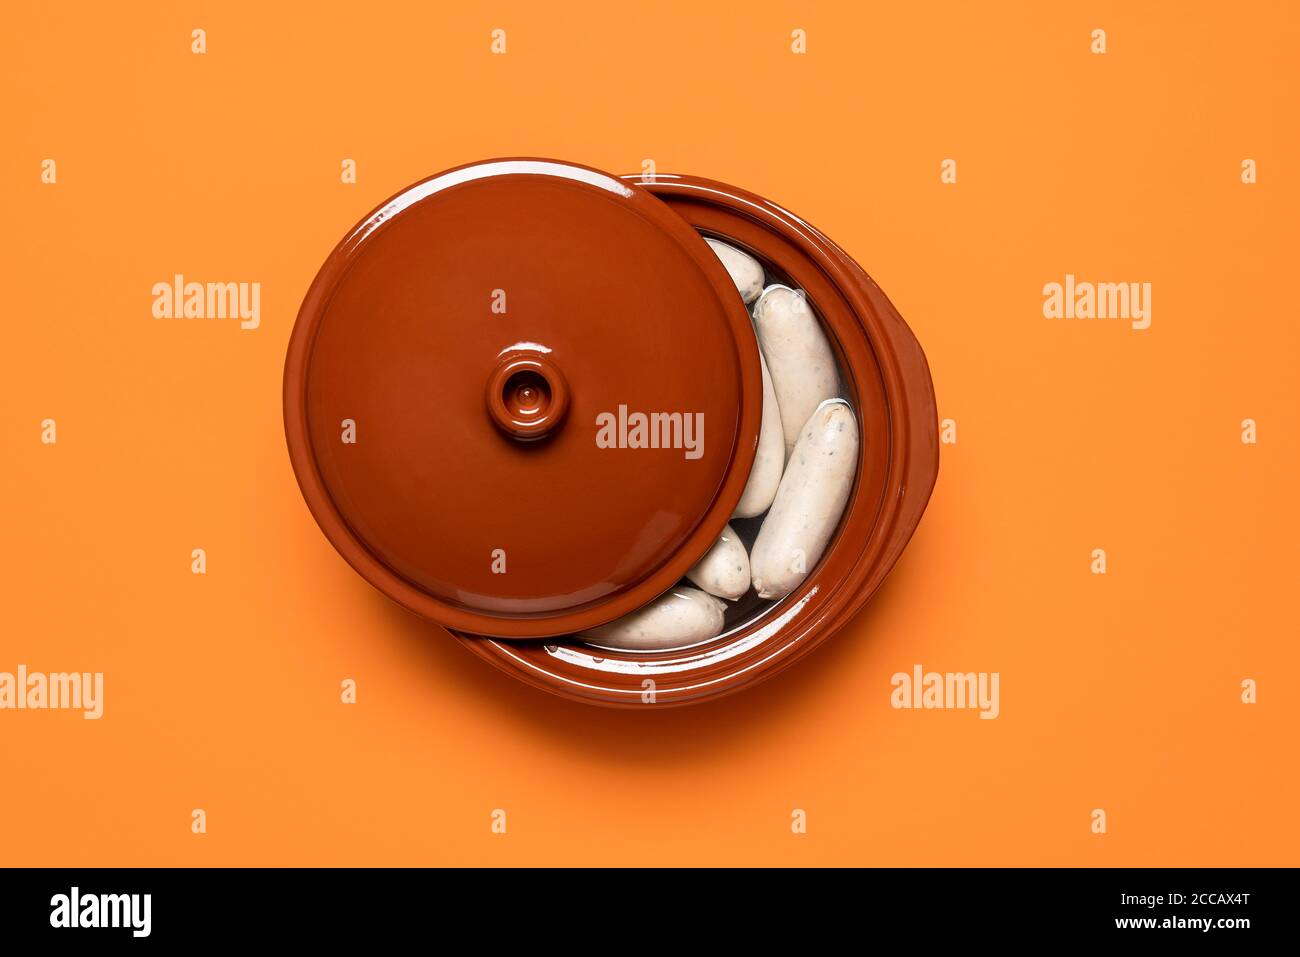 Boiled white sausage in a brown pot, isolated on orange background. Top view of Bavarian veal sausage in water. German traditional weisswurst. Stock Photo